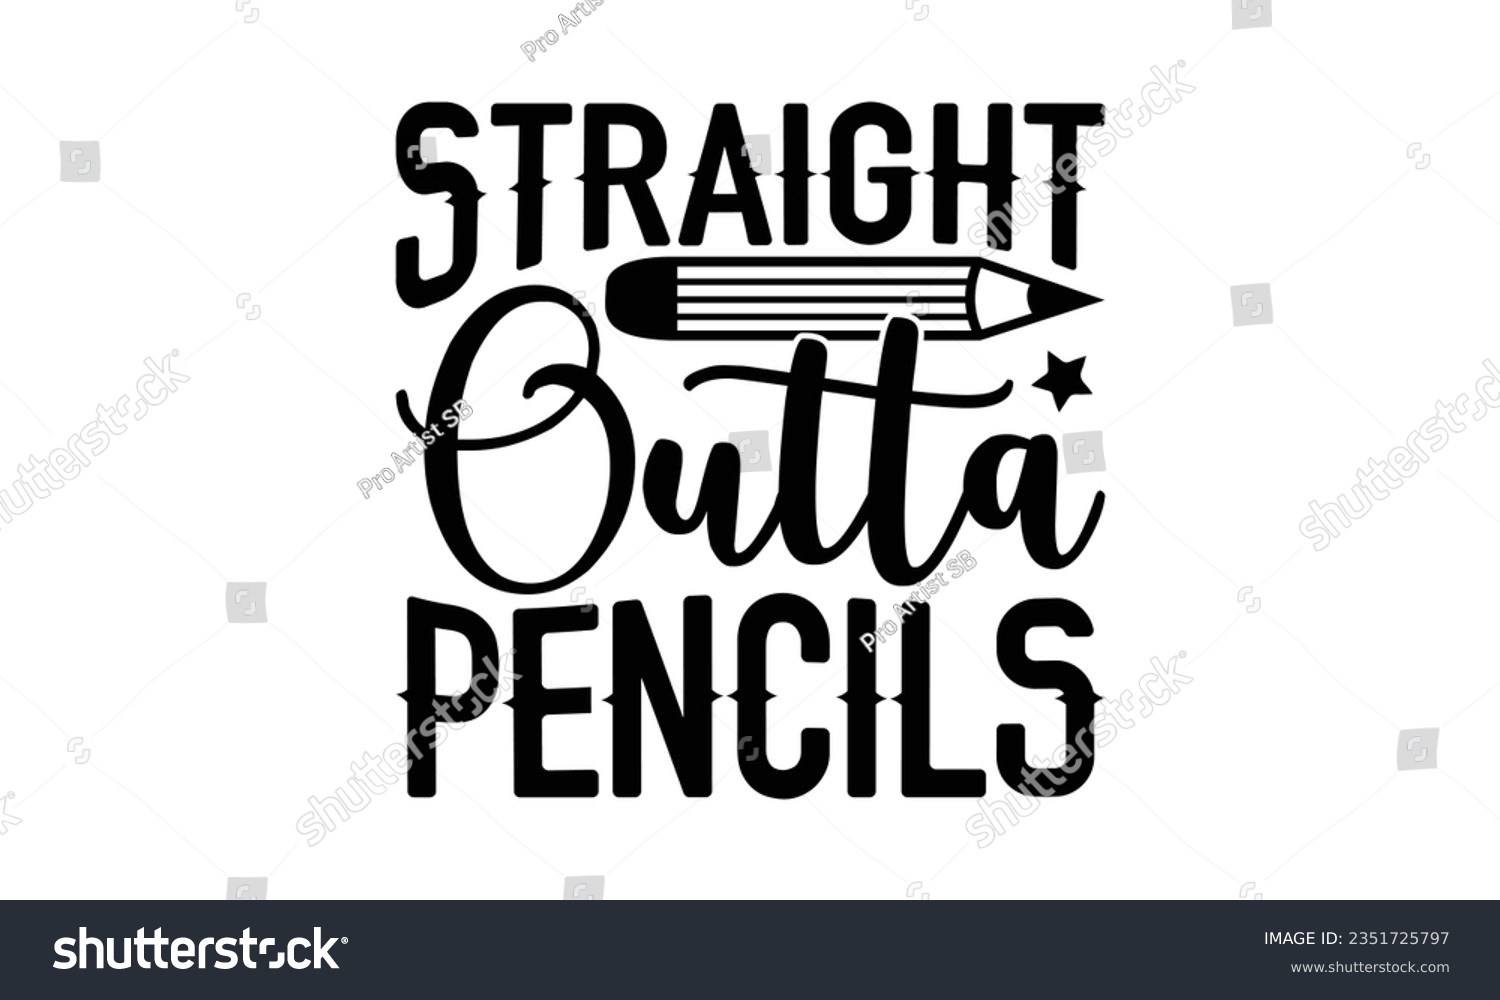 SVG of Straight outta pencils - Teacher SVG Design, Blessed Teacher Quotes, Calligraphy Graphic Design, Typography Poster with Old Style Camera and Quote. svg